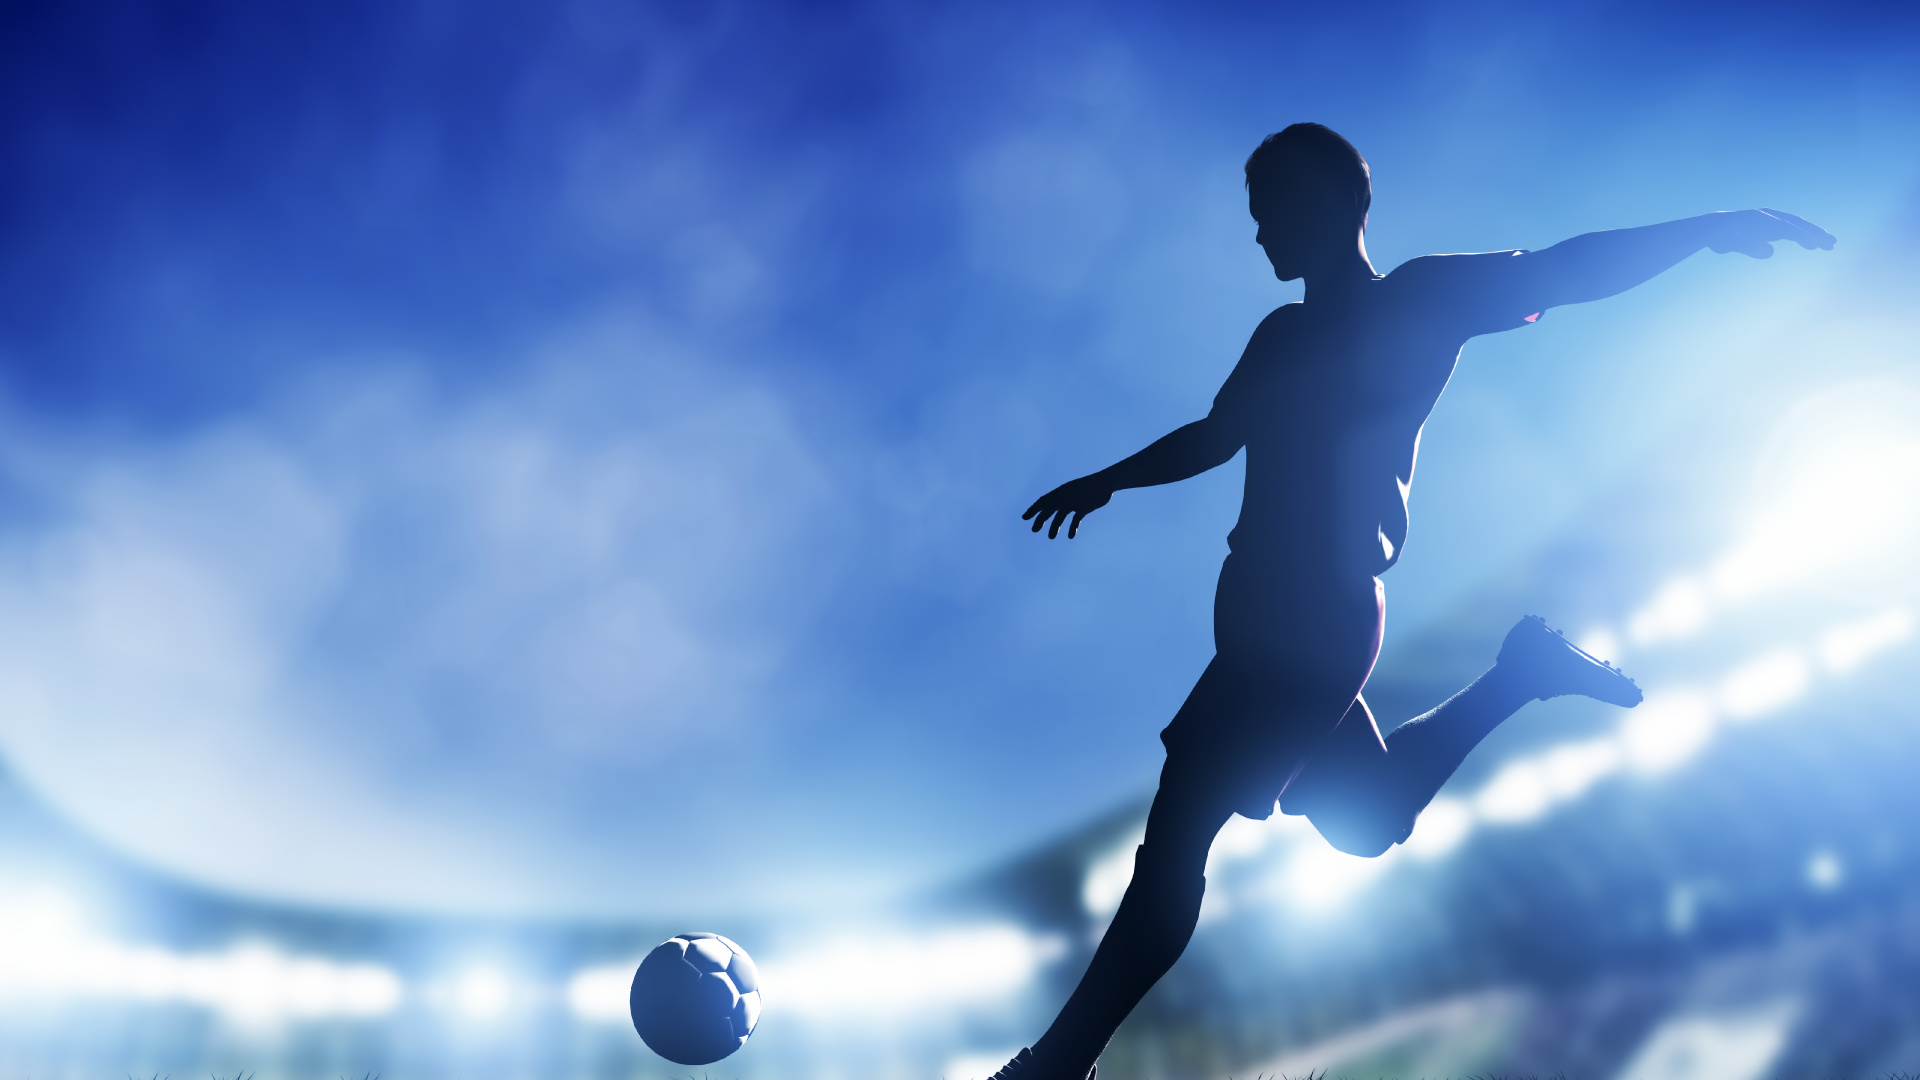 Man in Black Shorts Playing Soccer Ball. Wallpaper in 1920x1080 Resolution